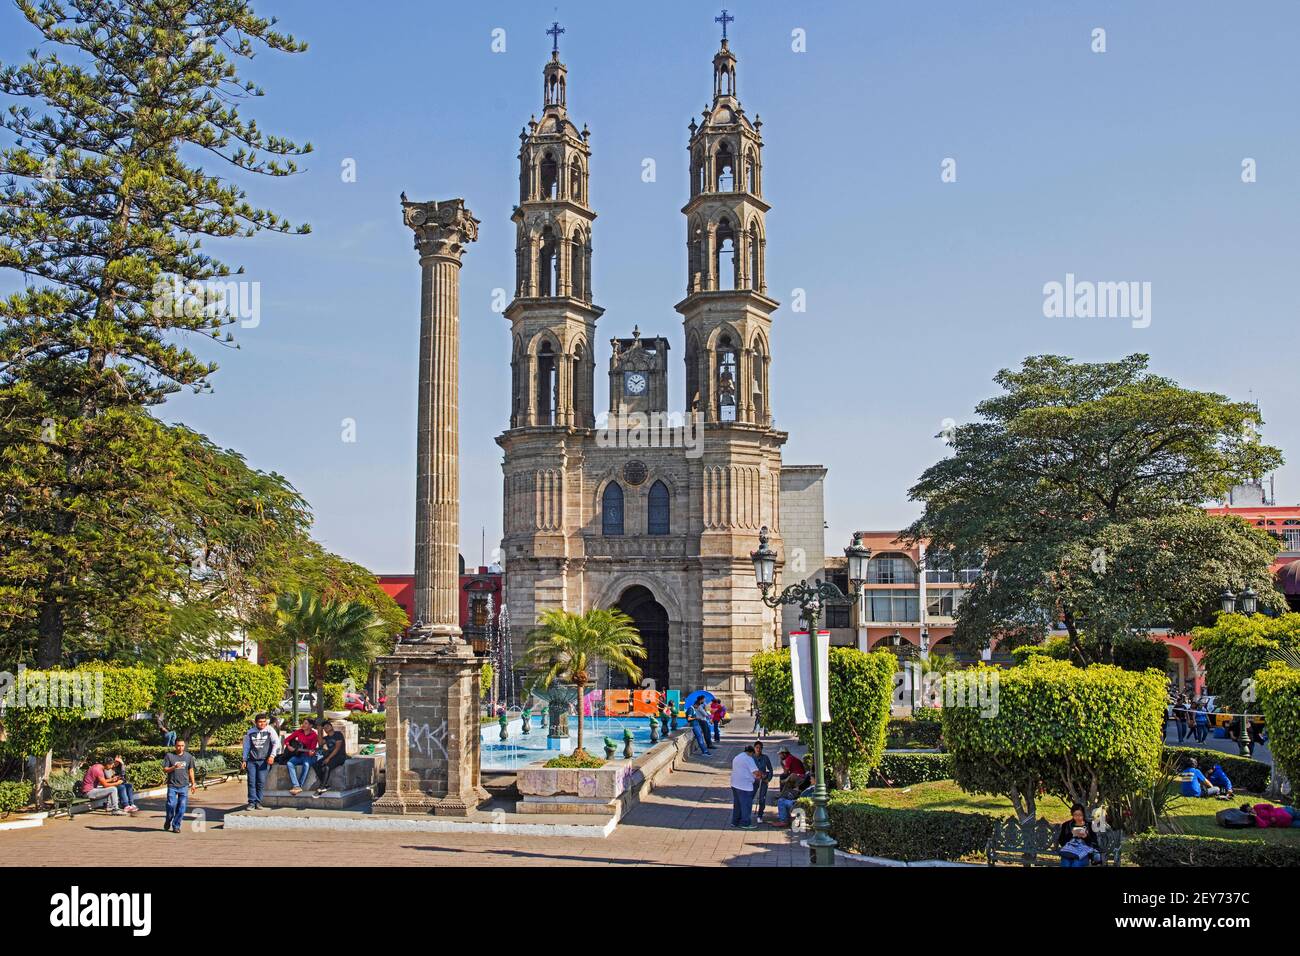 Neo-Gothic Immaculate Conception Cathedral / Catedral de la Purísima Concepción on the main square in the city centre of Tepic, Nayarit, Mexico Stock Photo